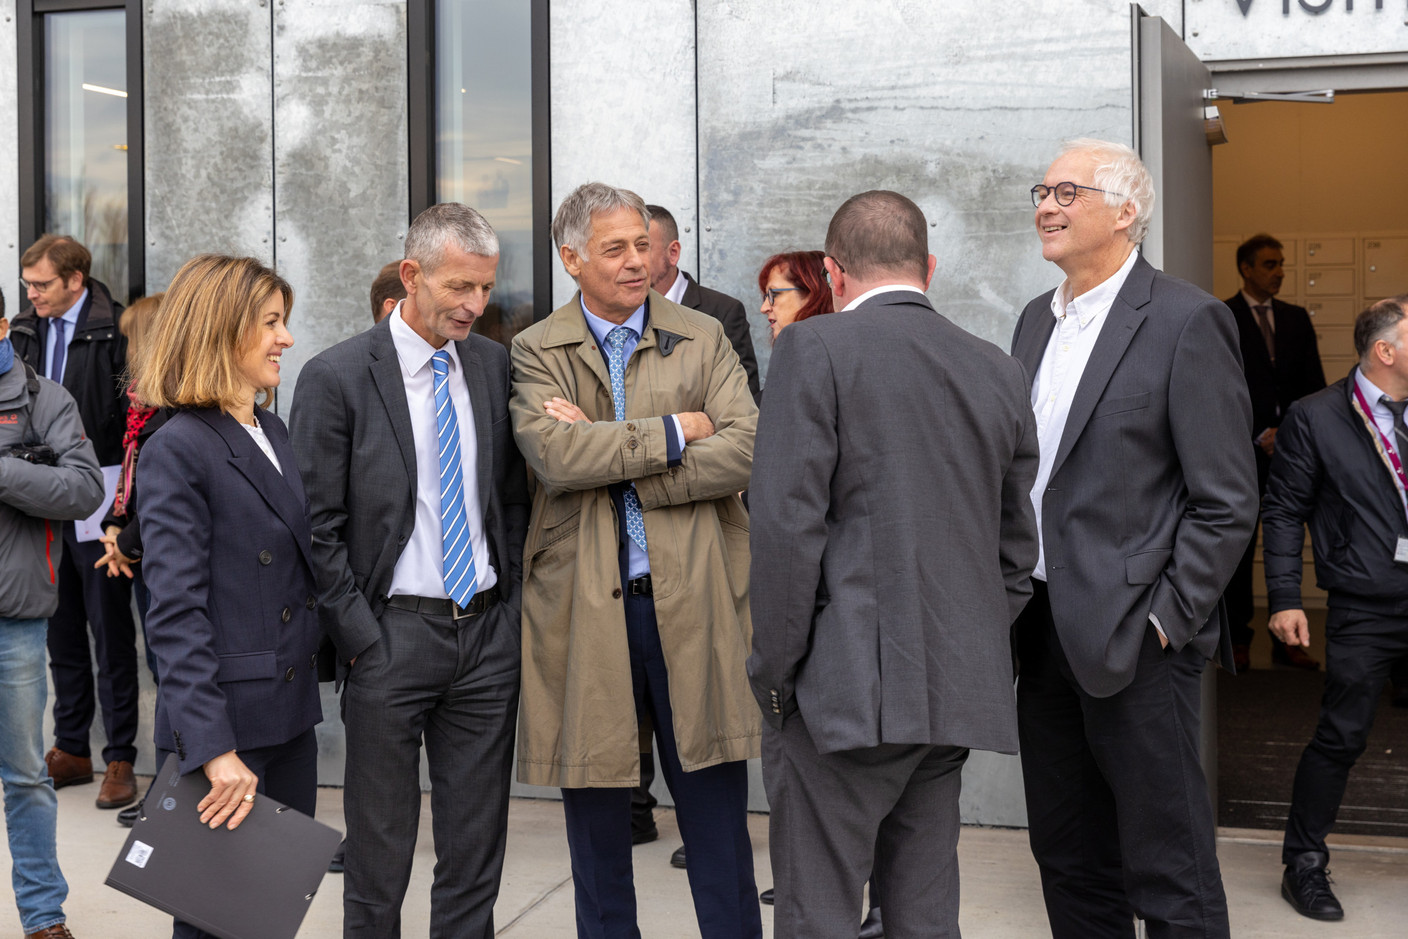 The minister of the interior, Henri Kox (Green party), as well as the team of the Public Buildings Administration, were present to welcome Grand Duke Henri. Photo: Romain Gamba/Maison Moderne